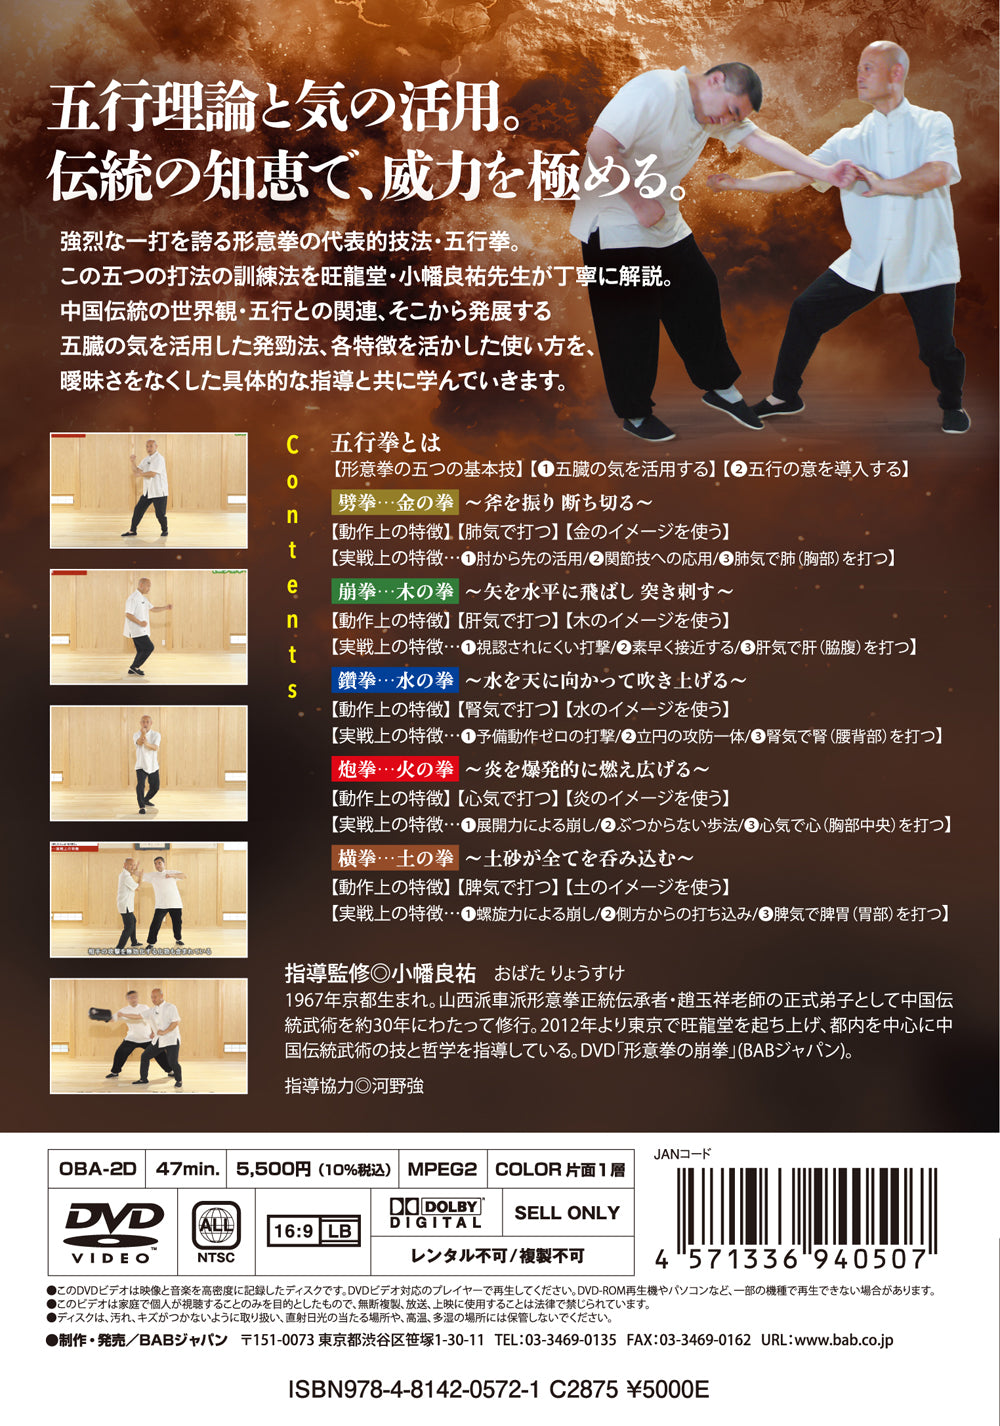 How to Get the Power of Strikes in Xing Yi Quan DVD by Ryosuke Obata